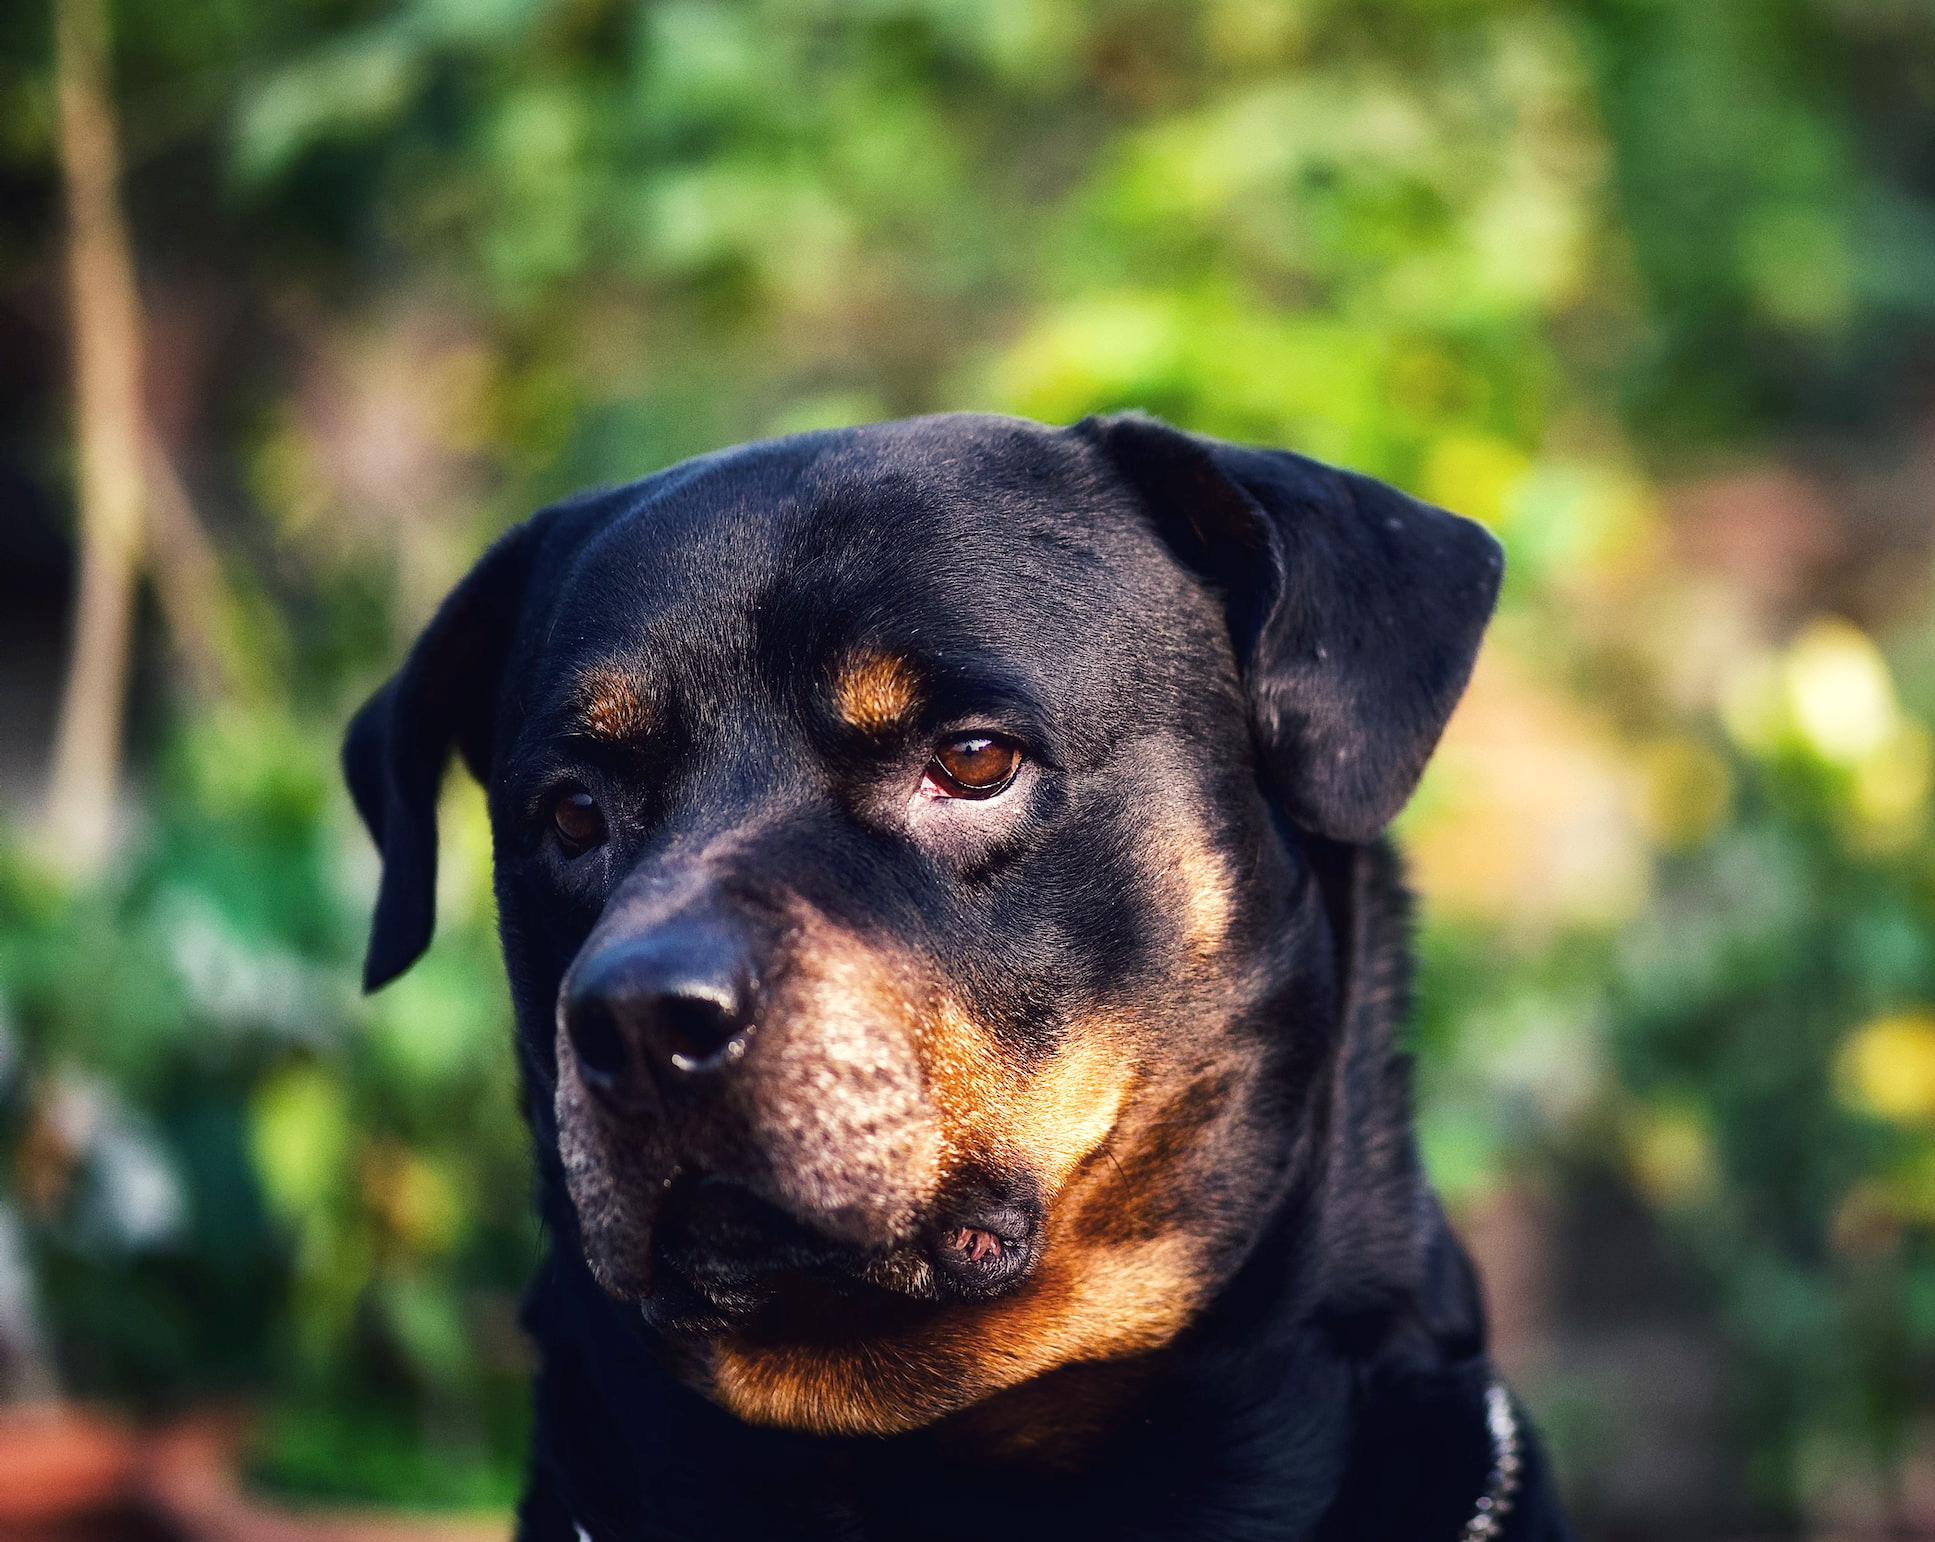 A Rottweiler protection it's owner. The Rottweiler has distinctive eyebrows